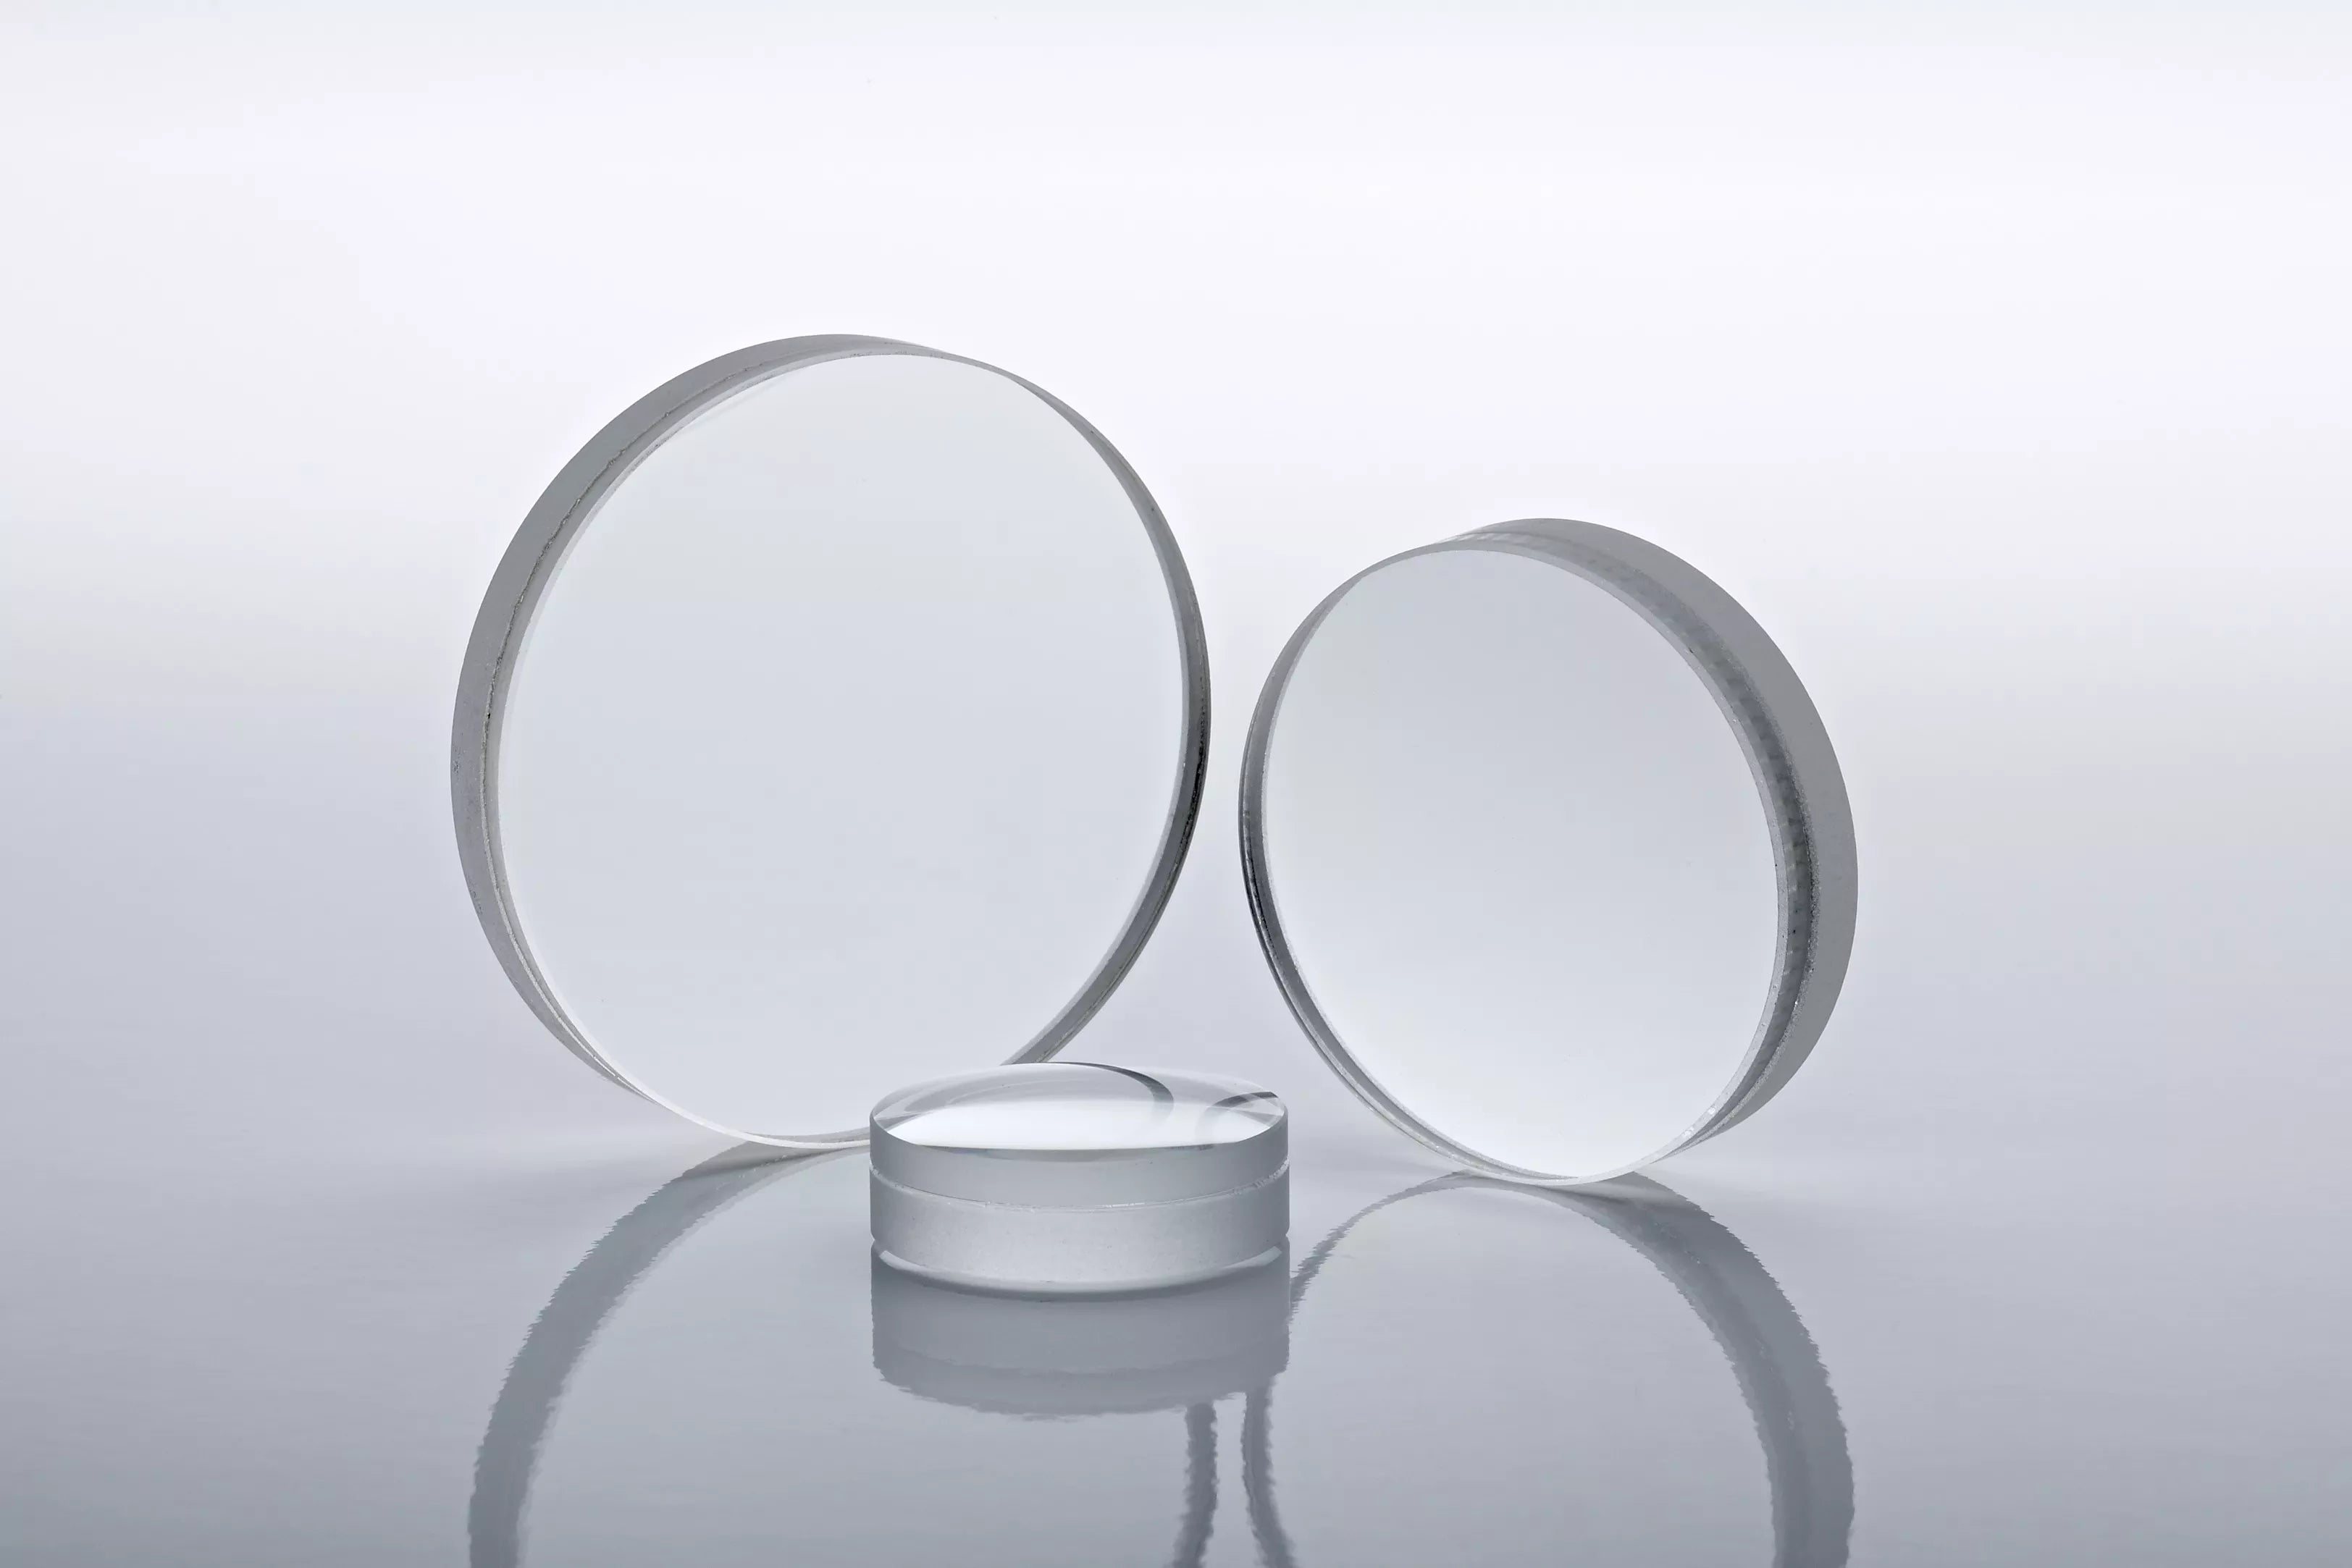 LDB7075-XS-Doublet lens, 75mmfl, 12.7mmdia, 4mmthk, BK7 or equiv., SF2 or equiv , ARcoated@400-700nm